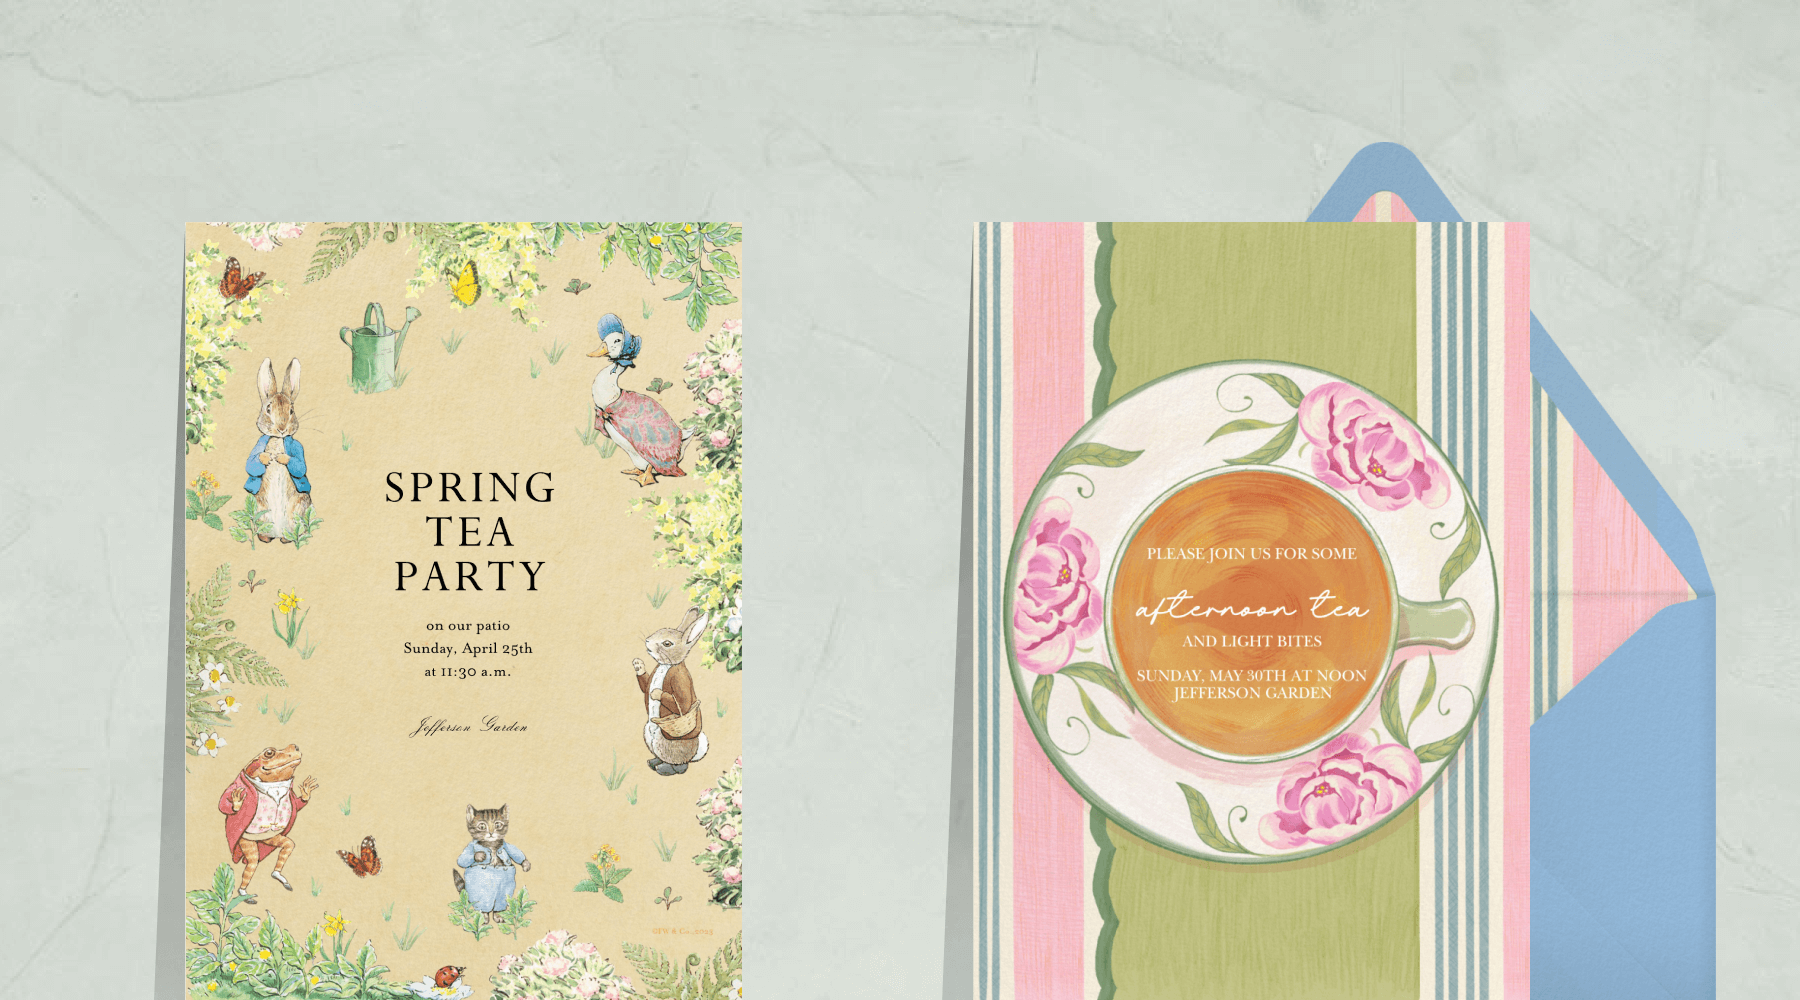 an invitation with Peter Rabbit and his farm friends; a pink and green striped invitation with a floral tea cup and saucer with a blue envelope and matching striped liner